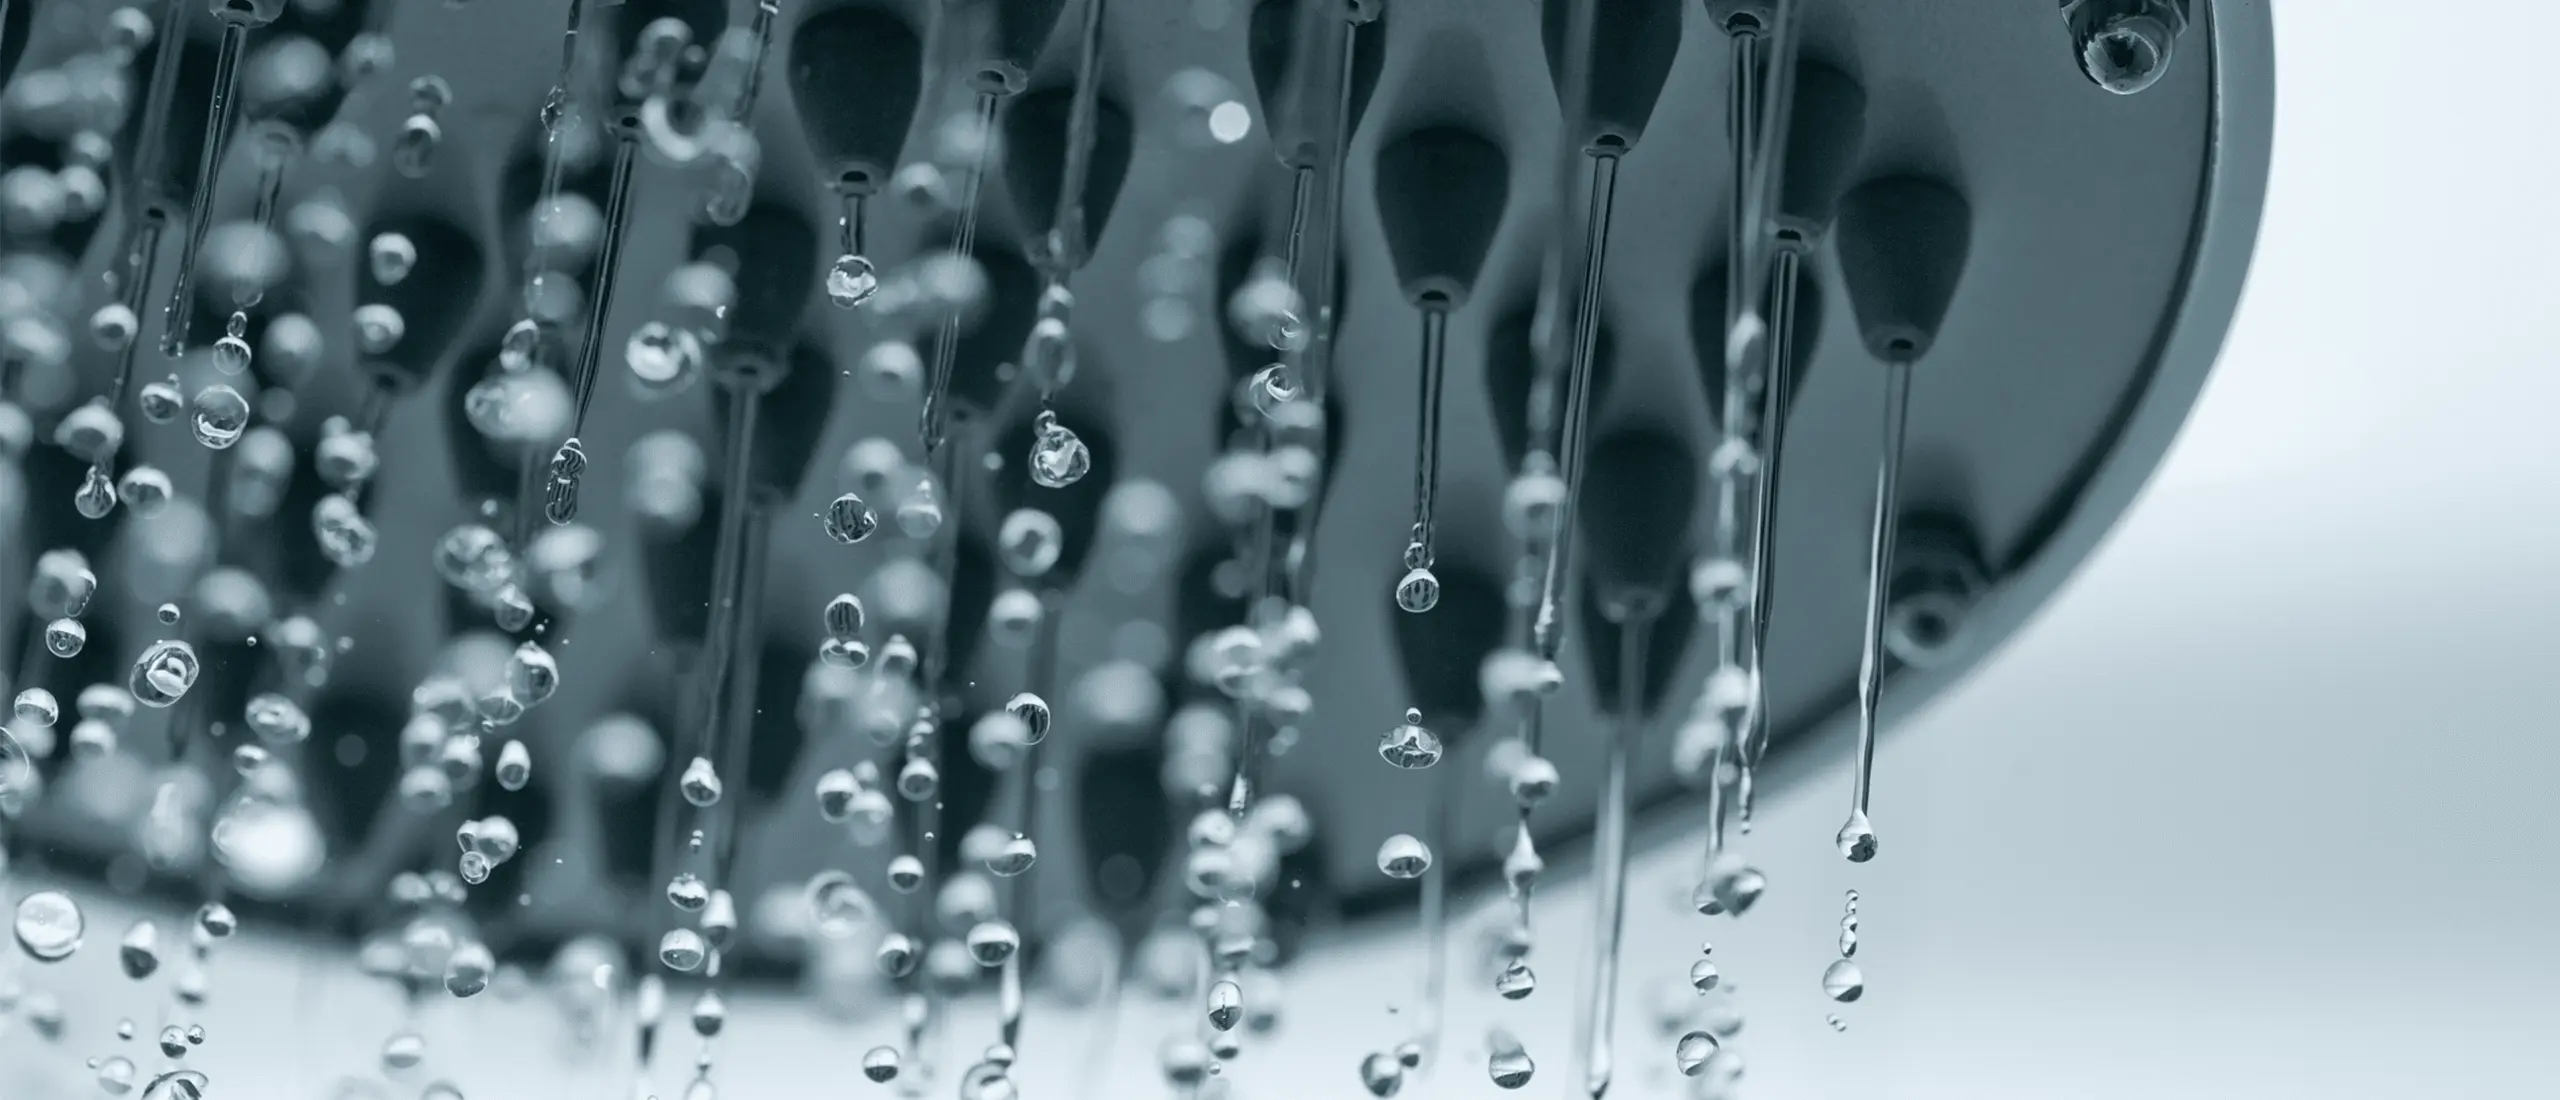 close up photo of a shower releasing water